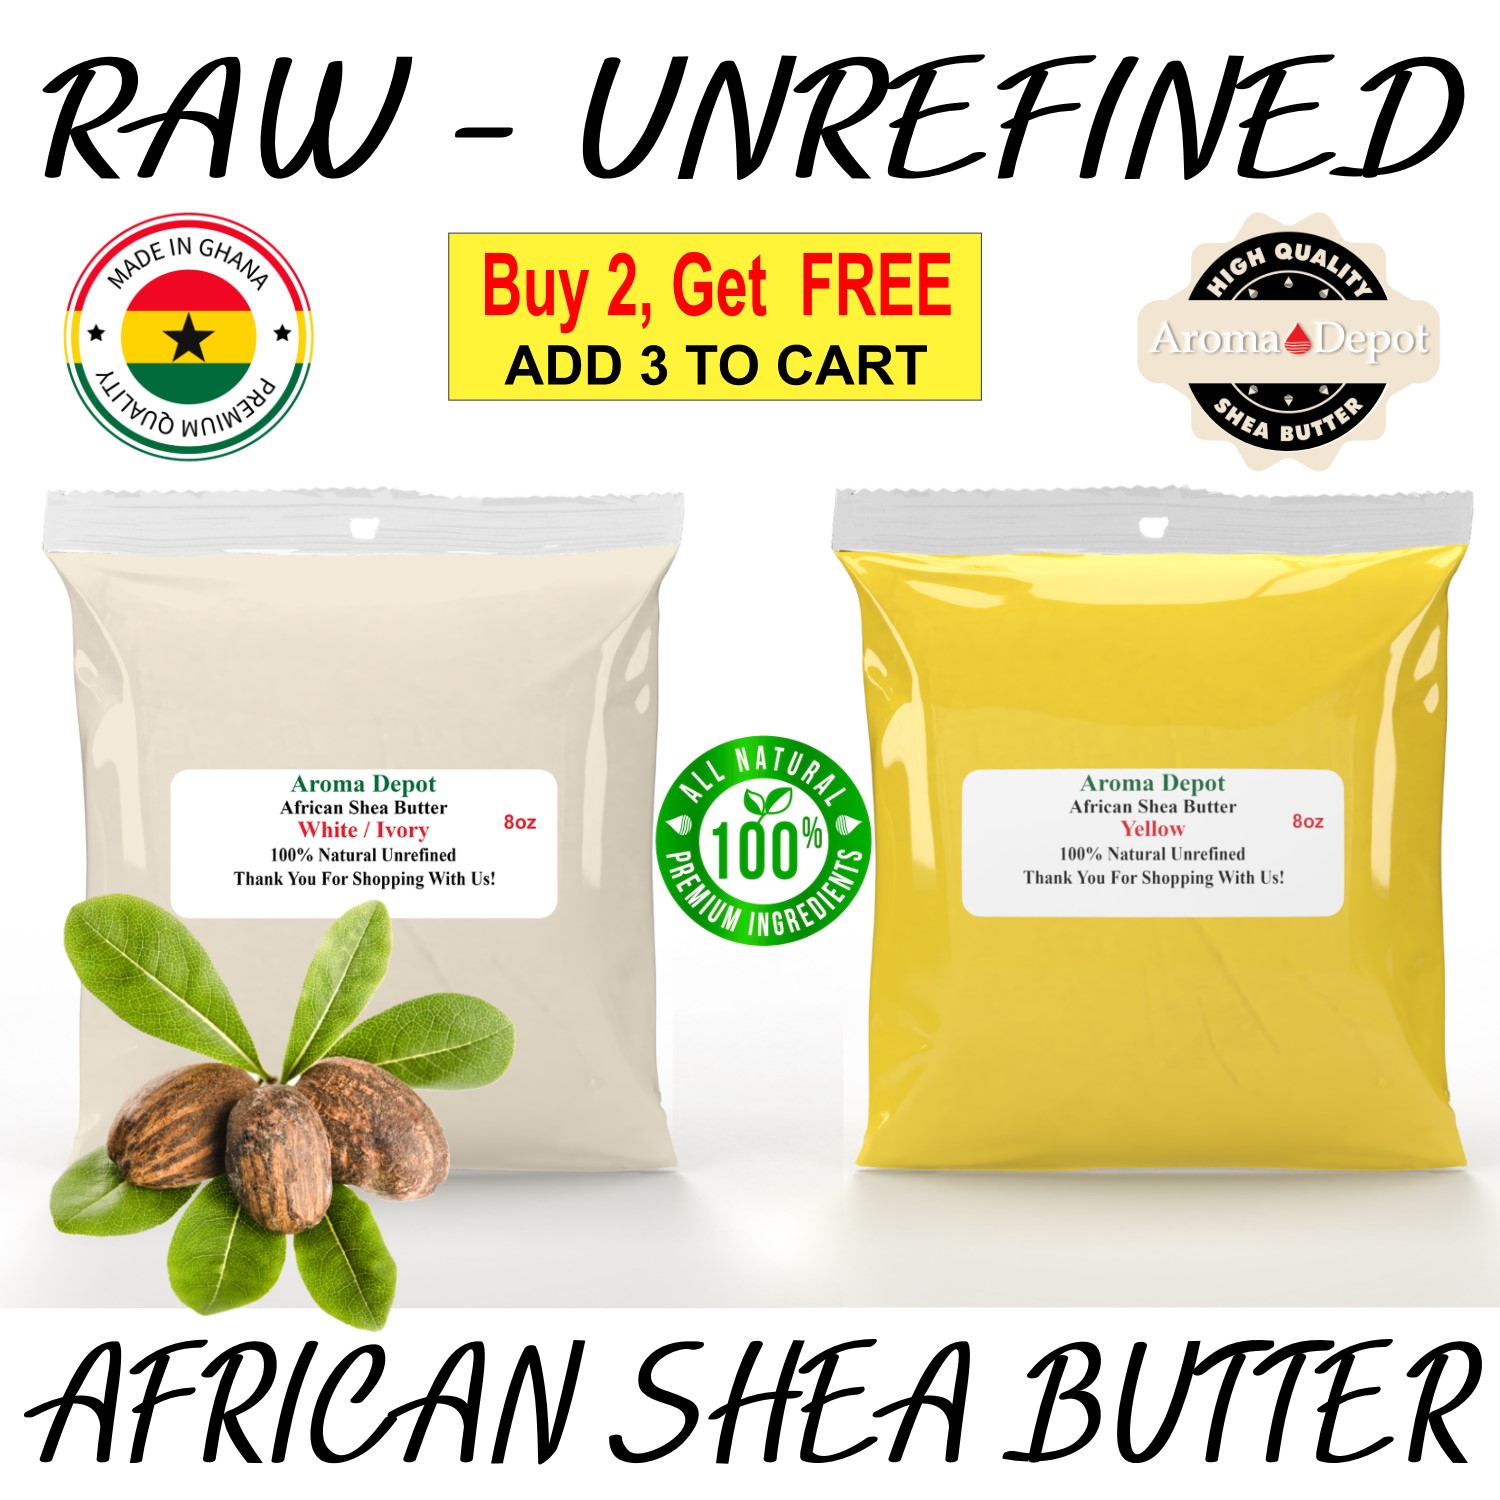 8 oz. Ivory / Yellows African Shea Butter Bags